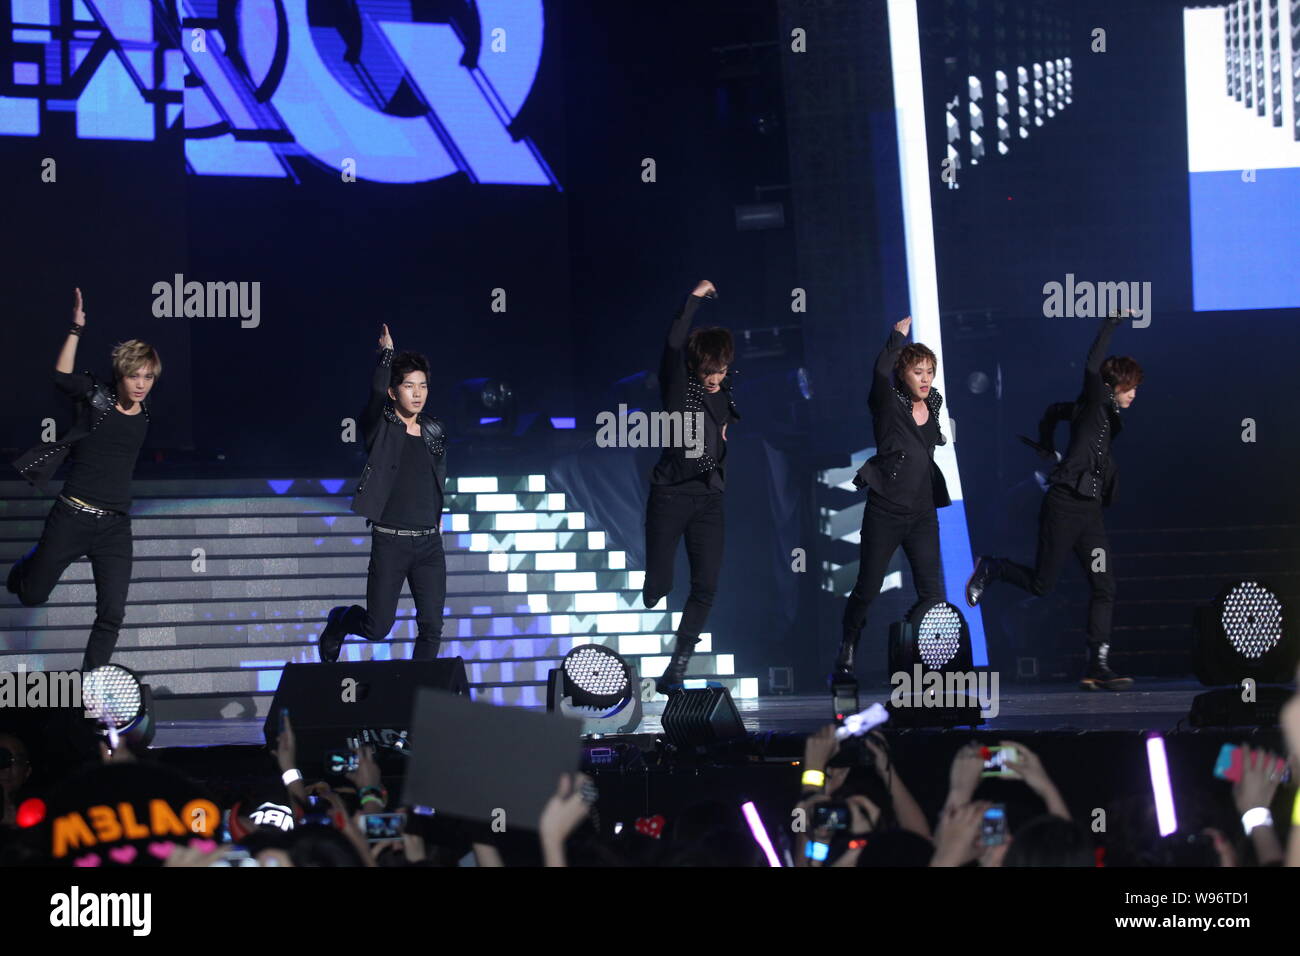 Members of South Korean pop group MBLAQ perform at the K-POP Festival Music Bank concert in Hong Kong, China, 23 June 2012.   Thousands of fans flocke Stock Photo